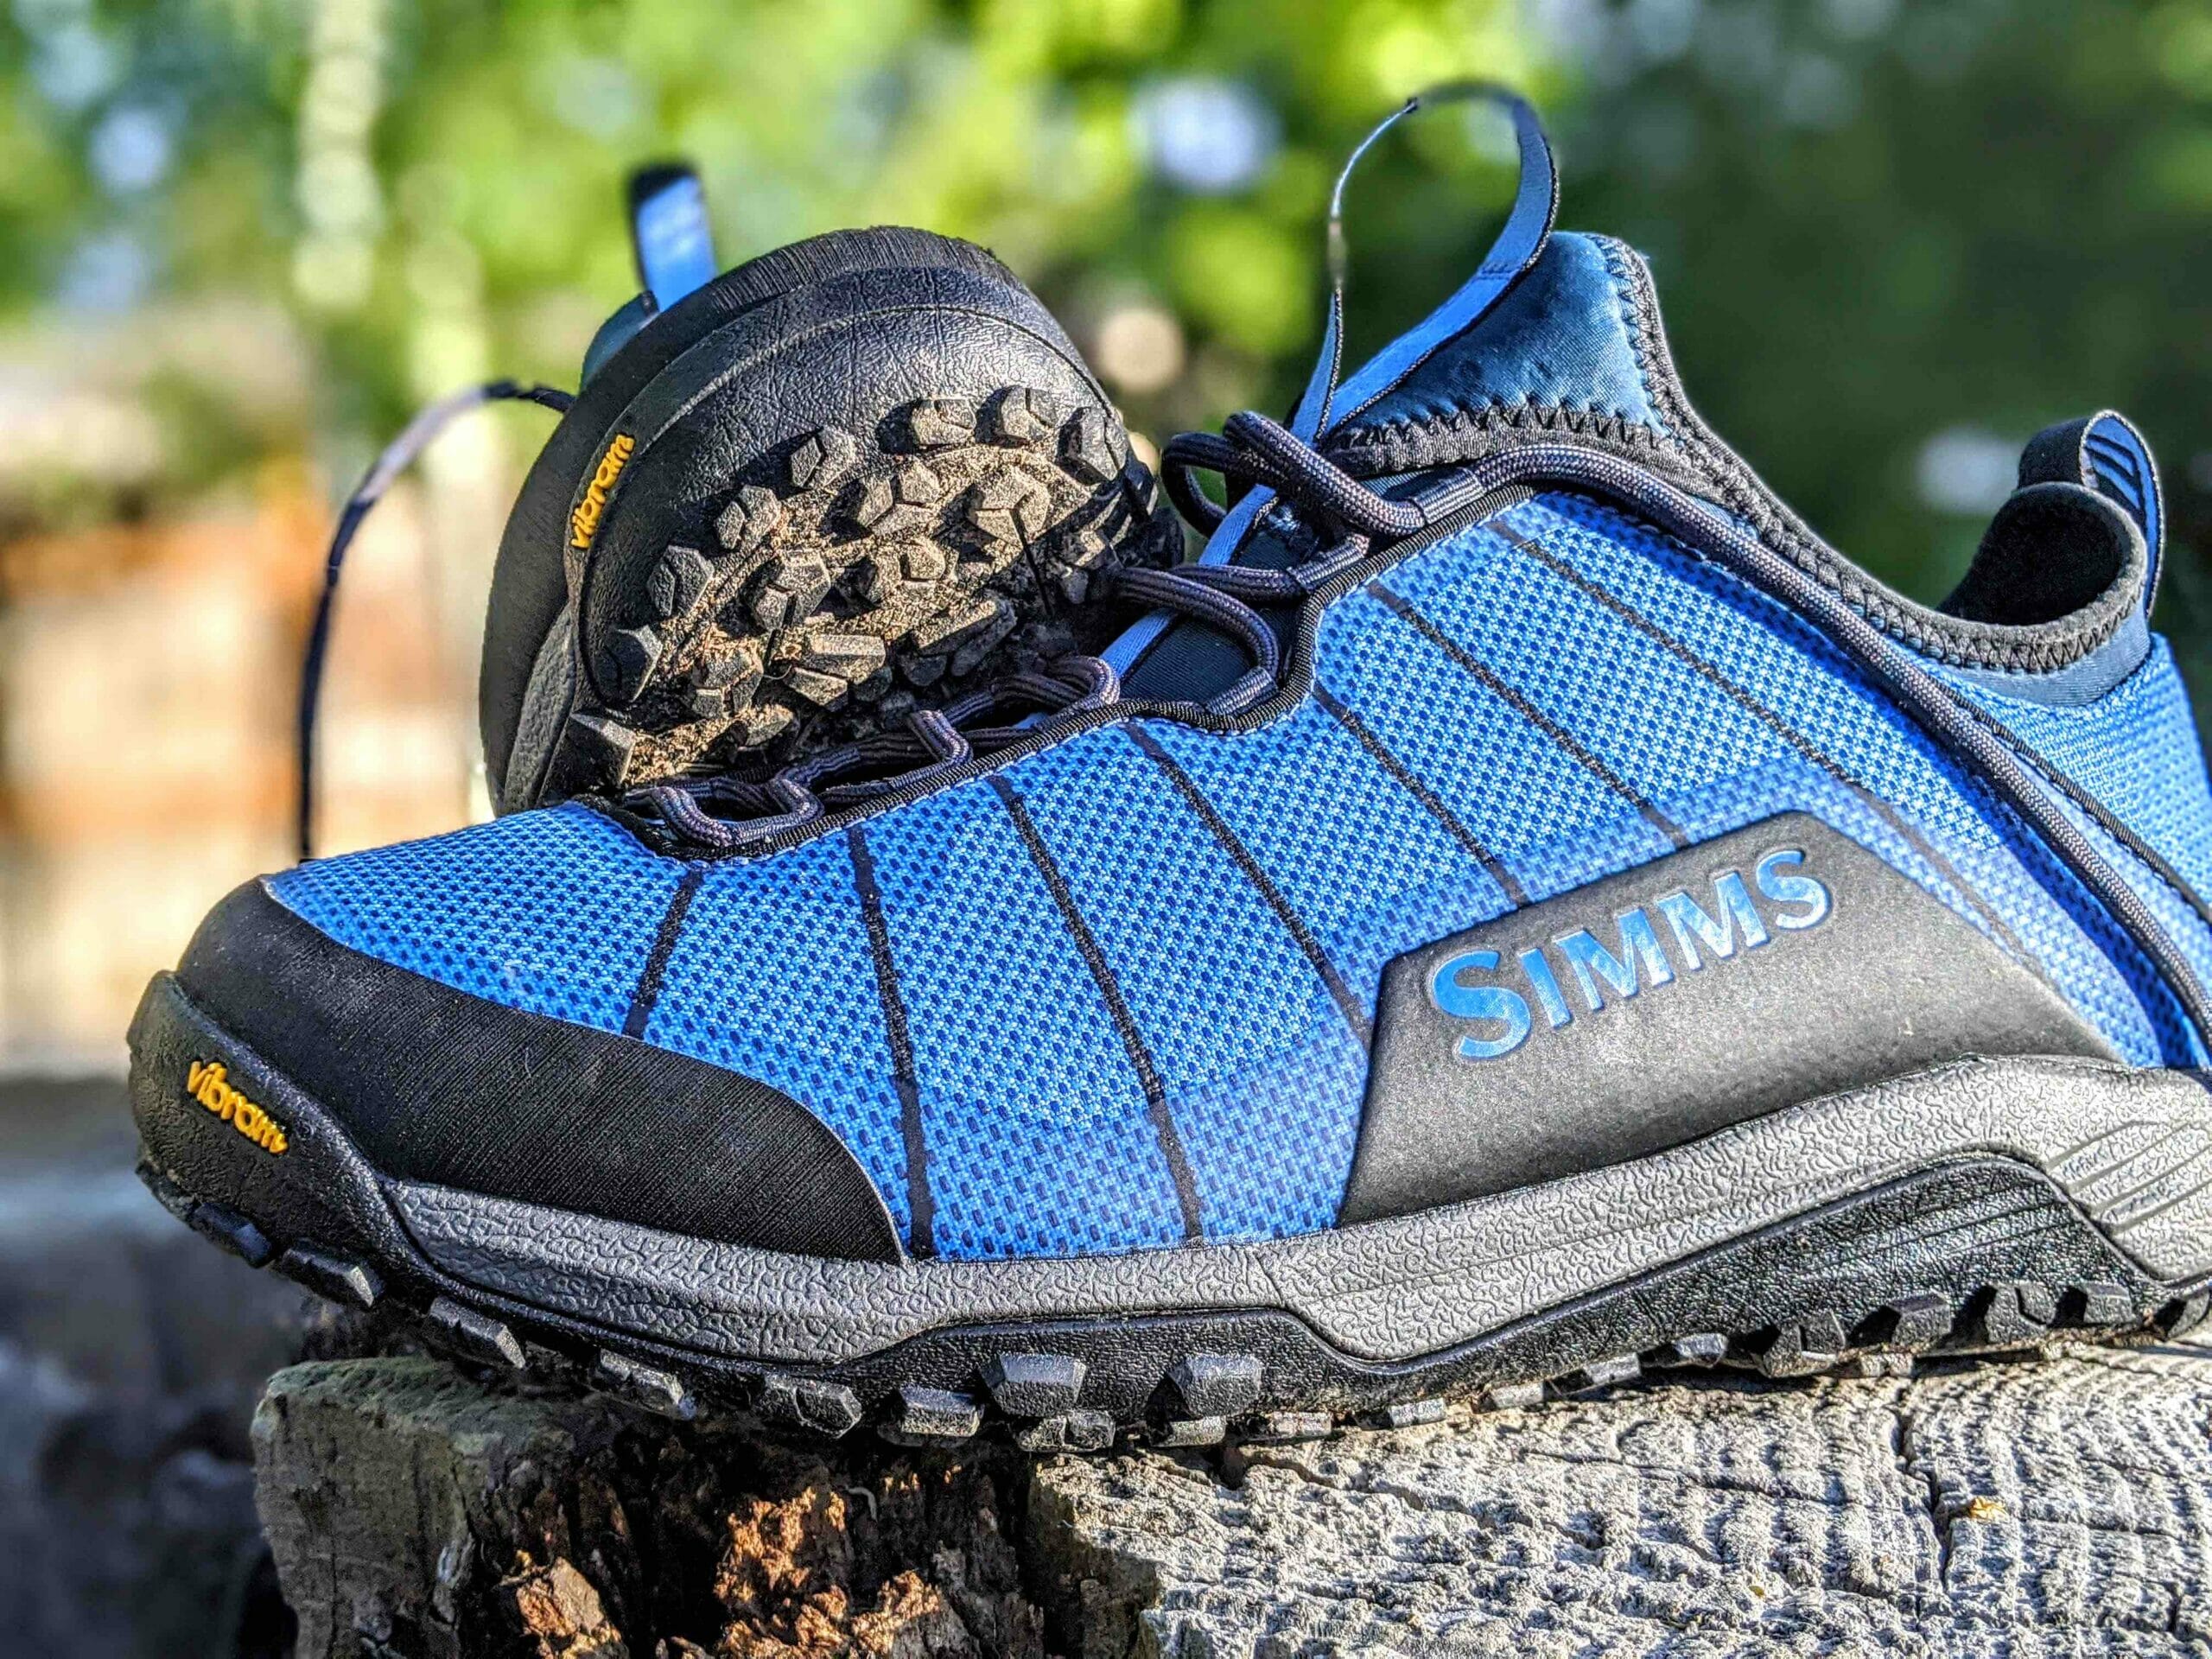 simms water shoes